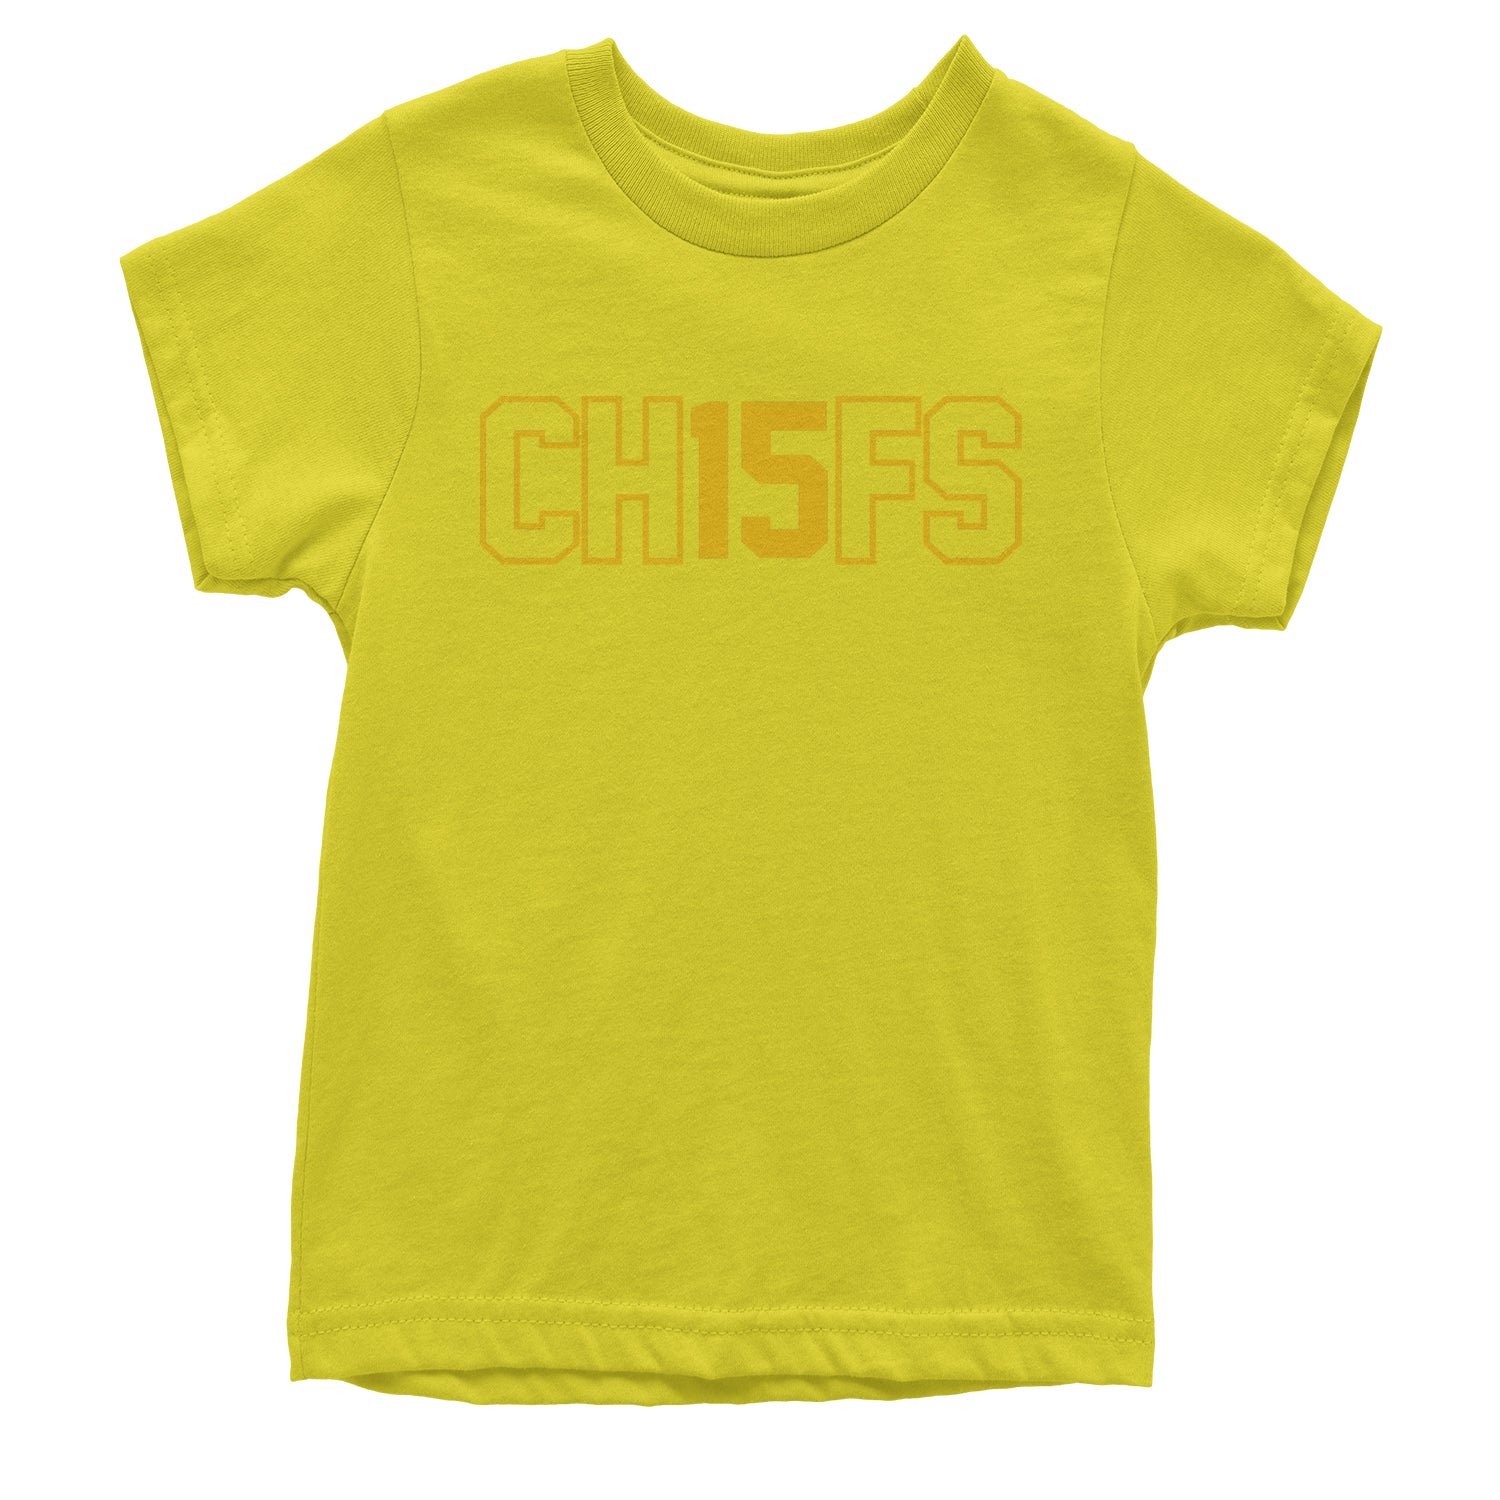 Ch15fs Chief 15 Shirt Youth T-shirt ass, big, burrowhead, game, kelce, know, moutha, my, nd, patrick, role, shut, sports, your by Expression Tees